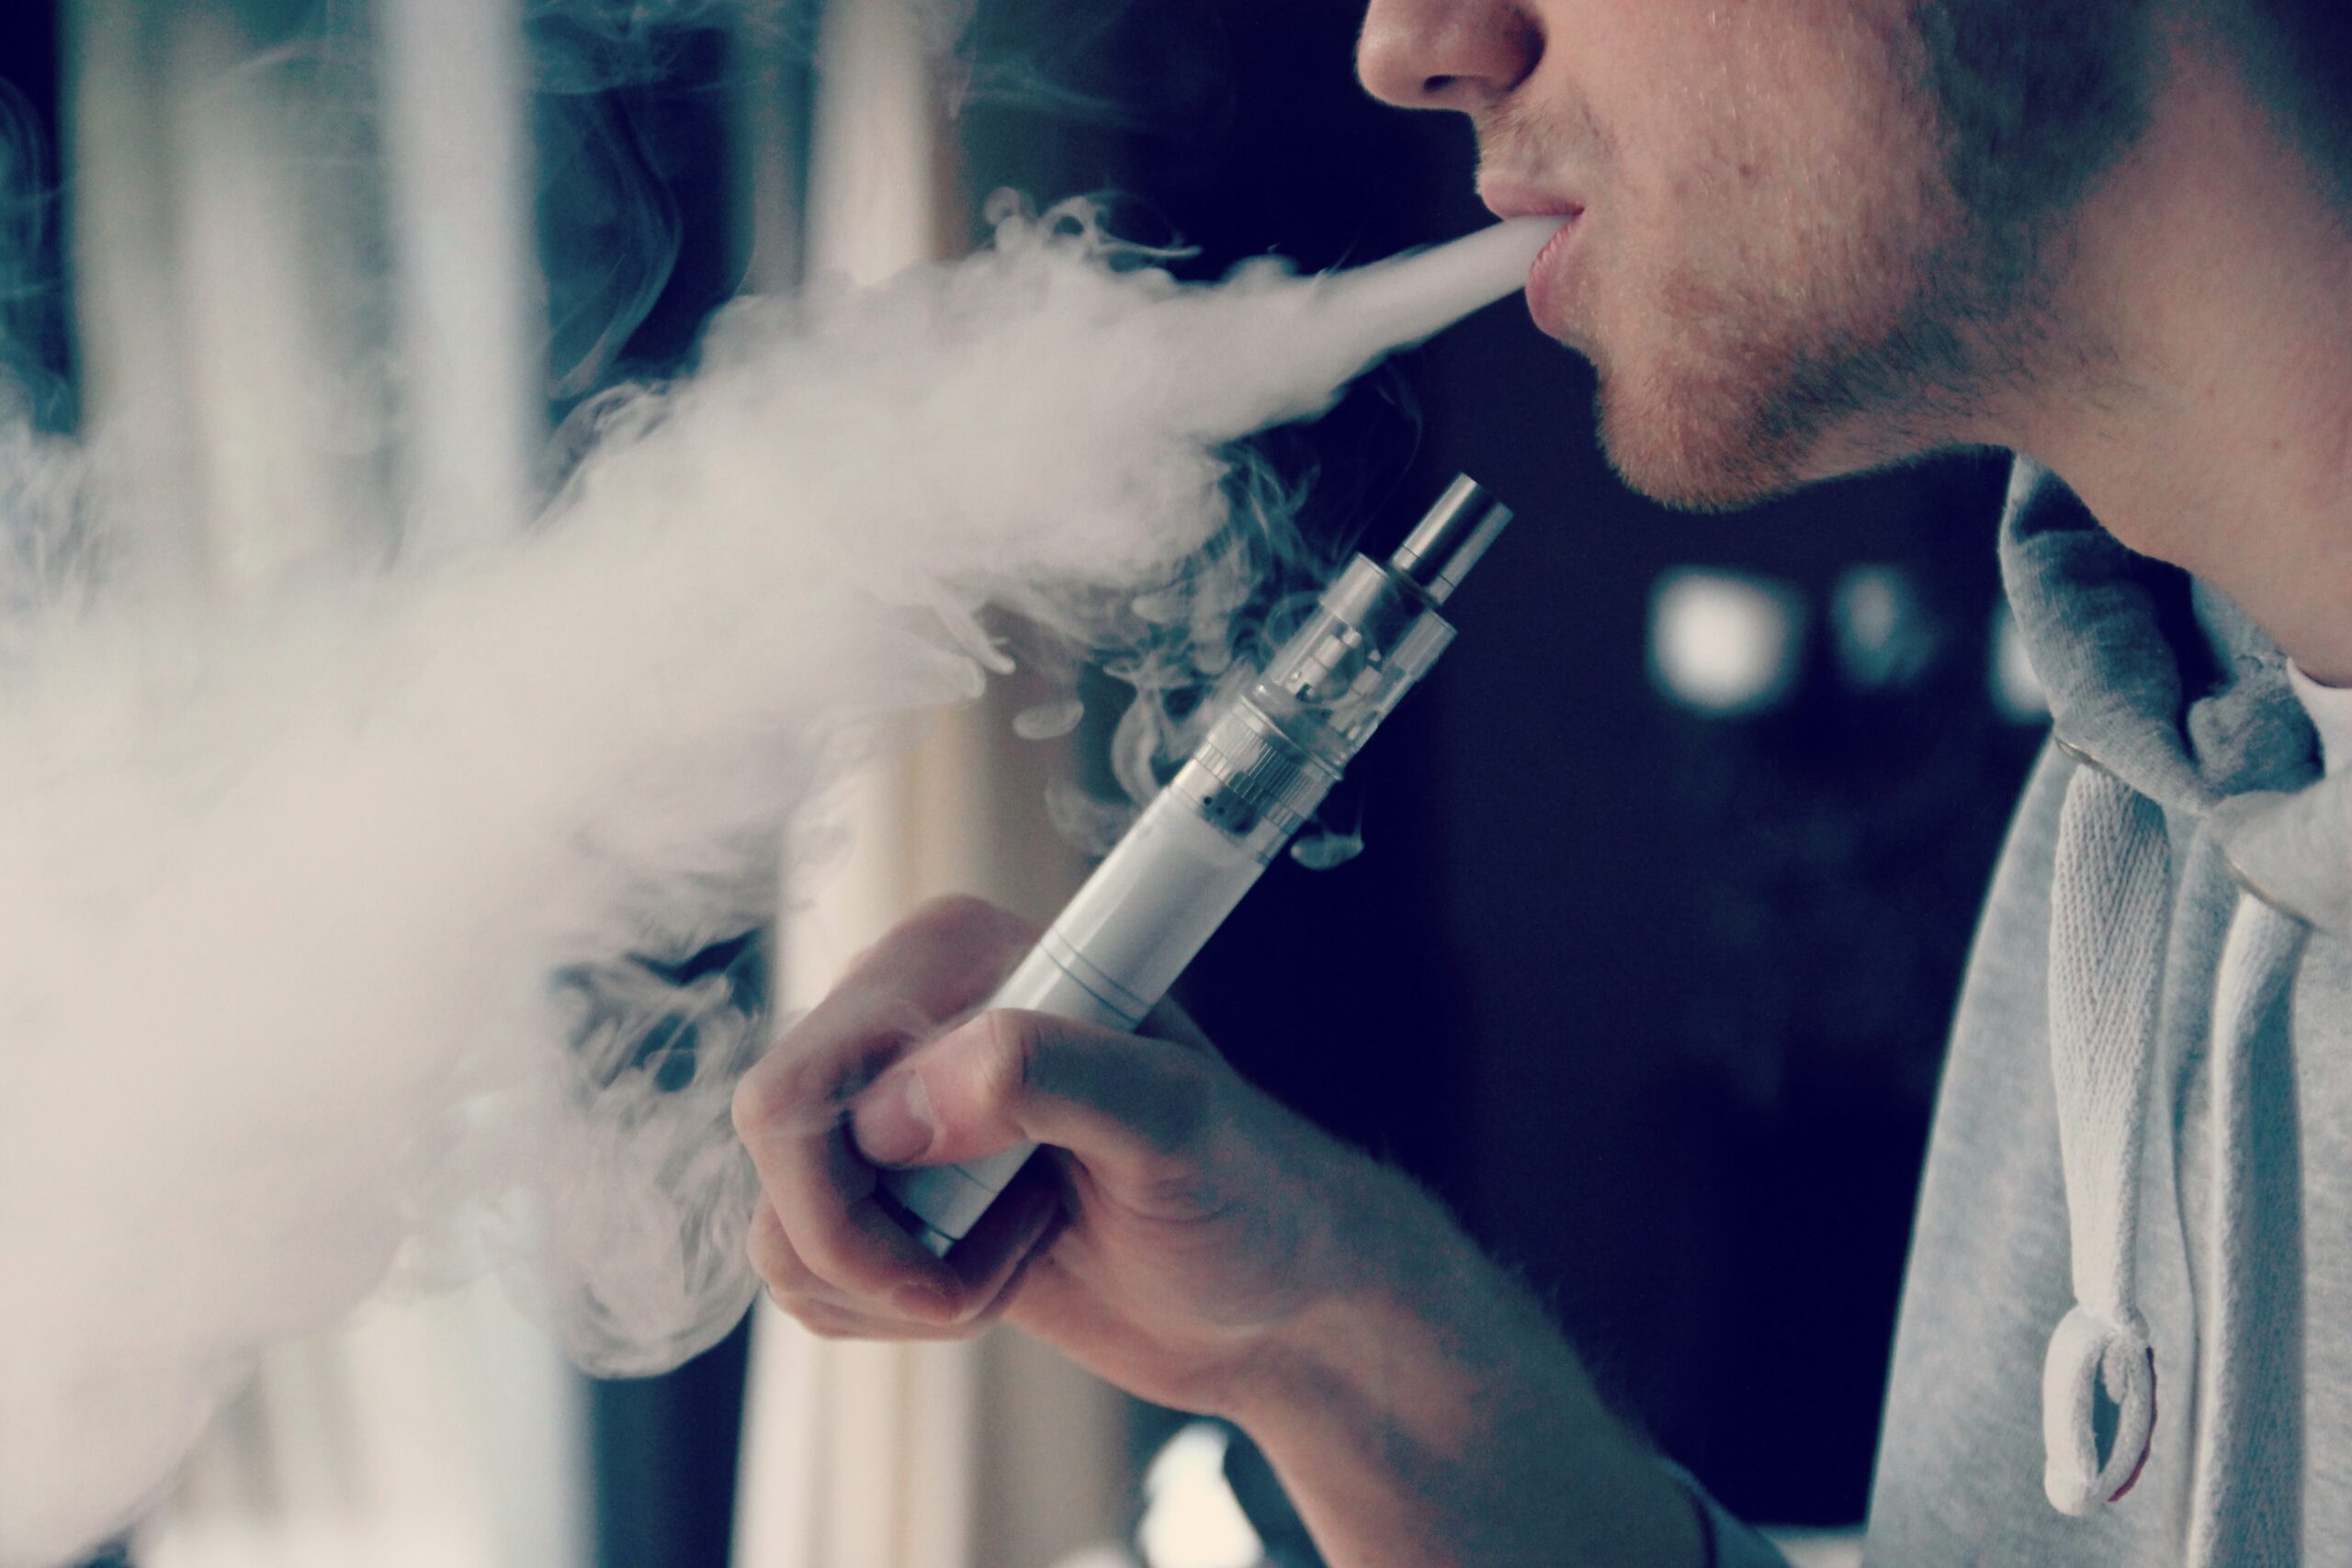 Wisconsin Lawmakers Work To Catch Up With E-Cigarette Boom